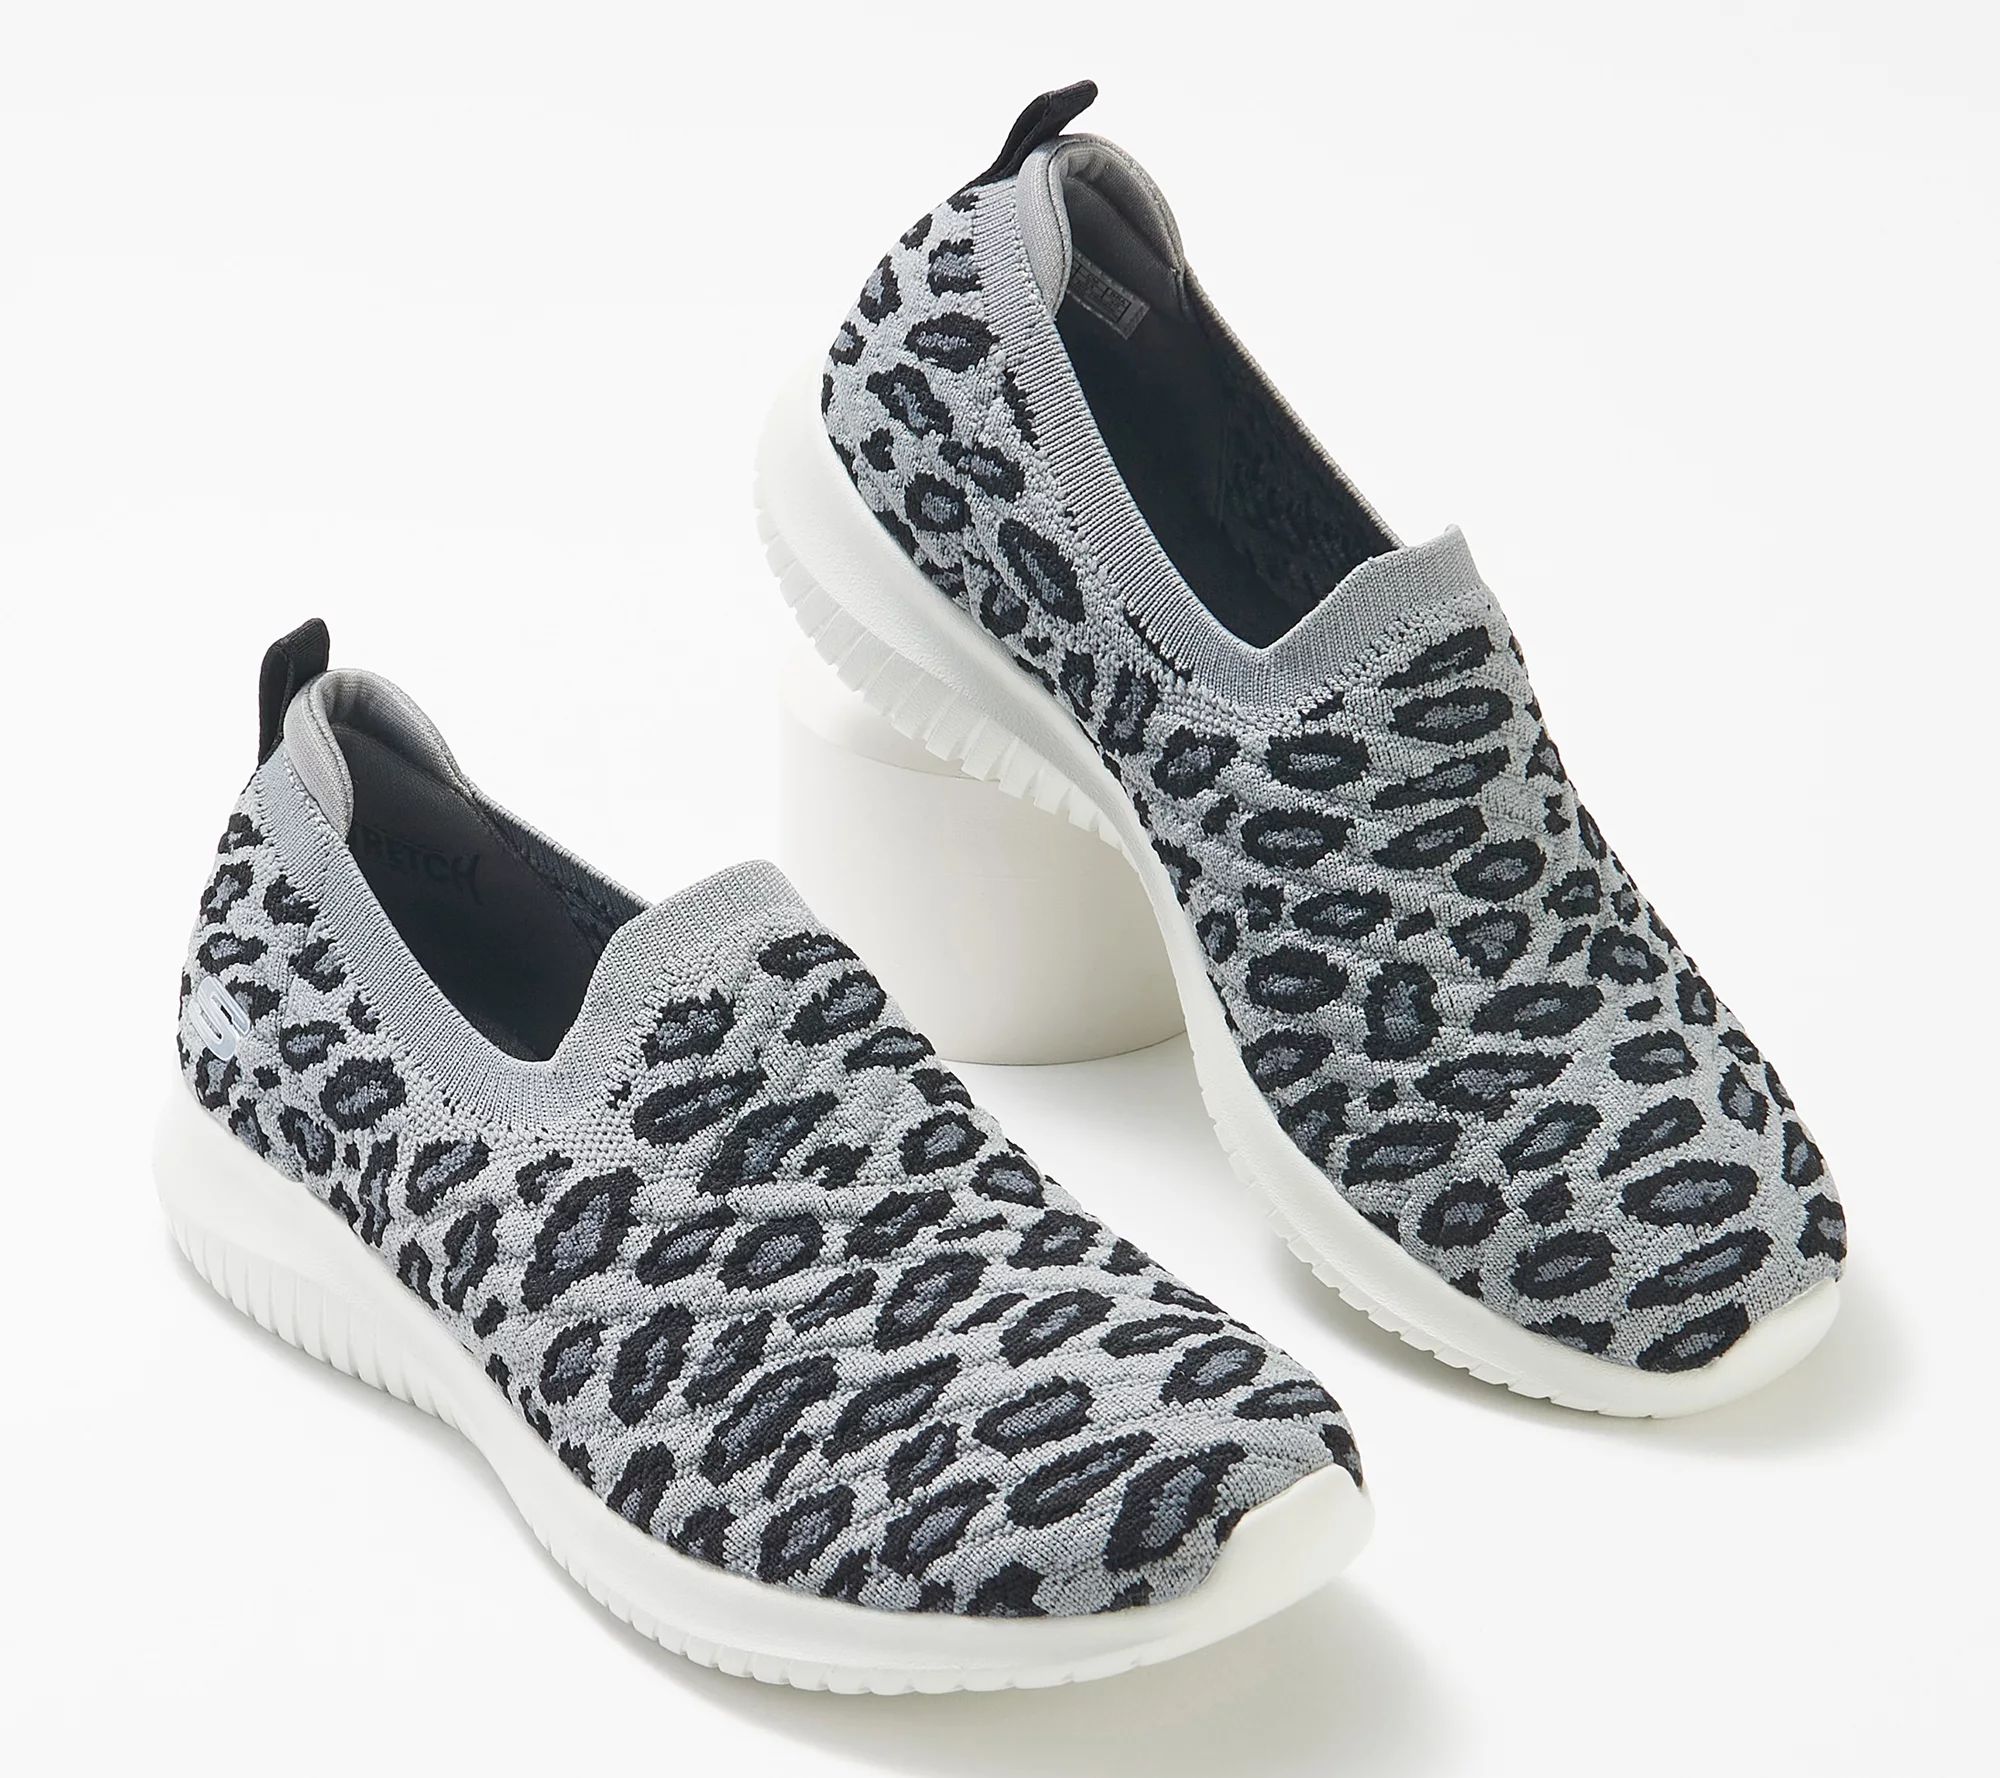 Skechers Ultra Flex Washable Printed Knit Slip-On Shoes - Sky's The Limit | QVC